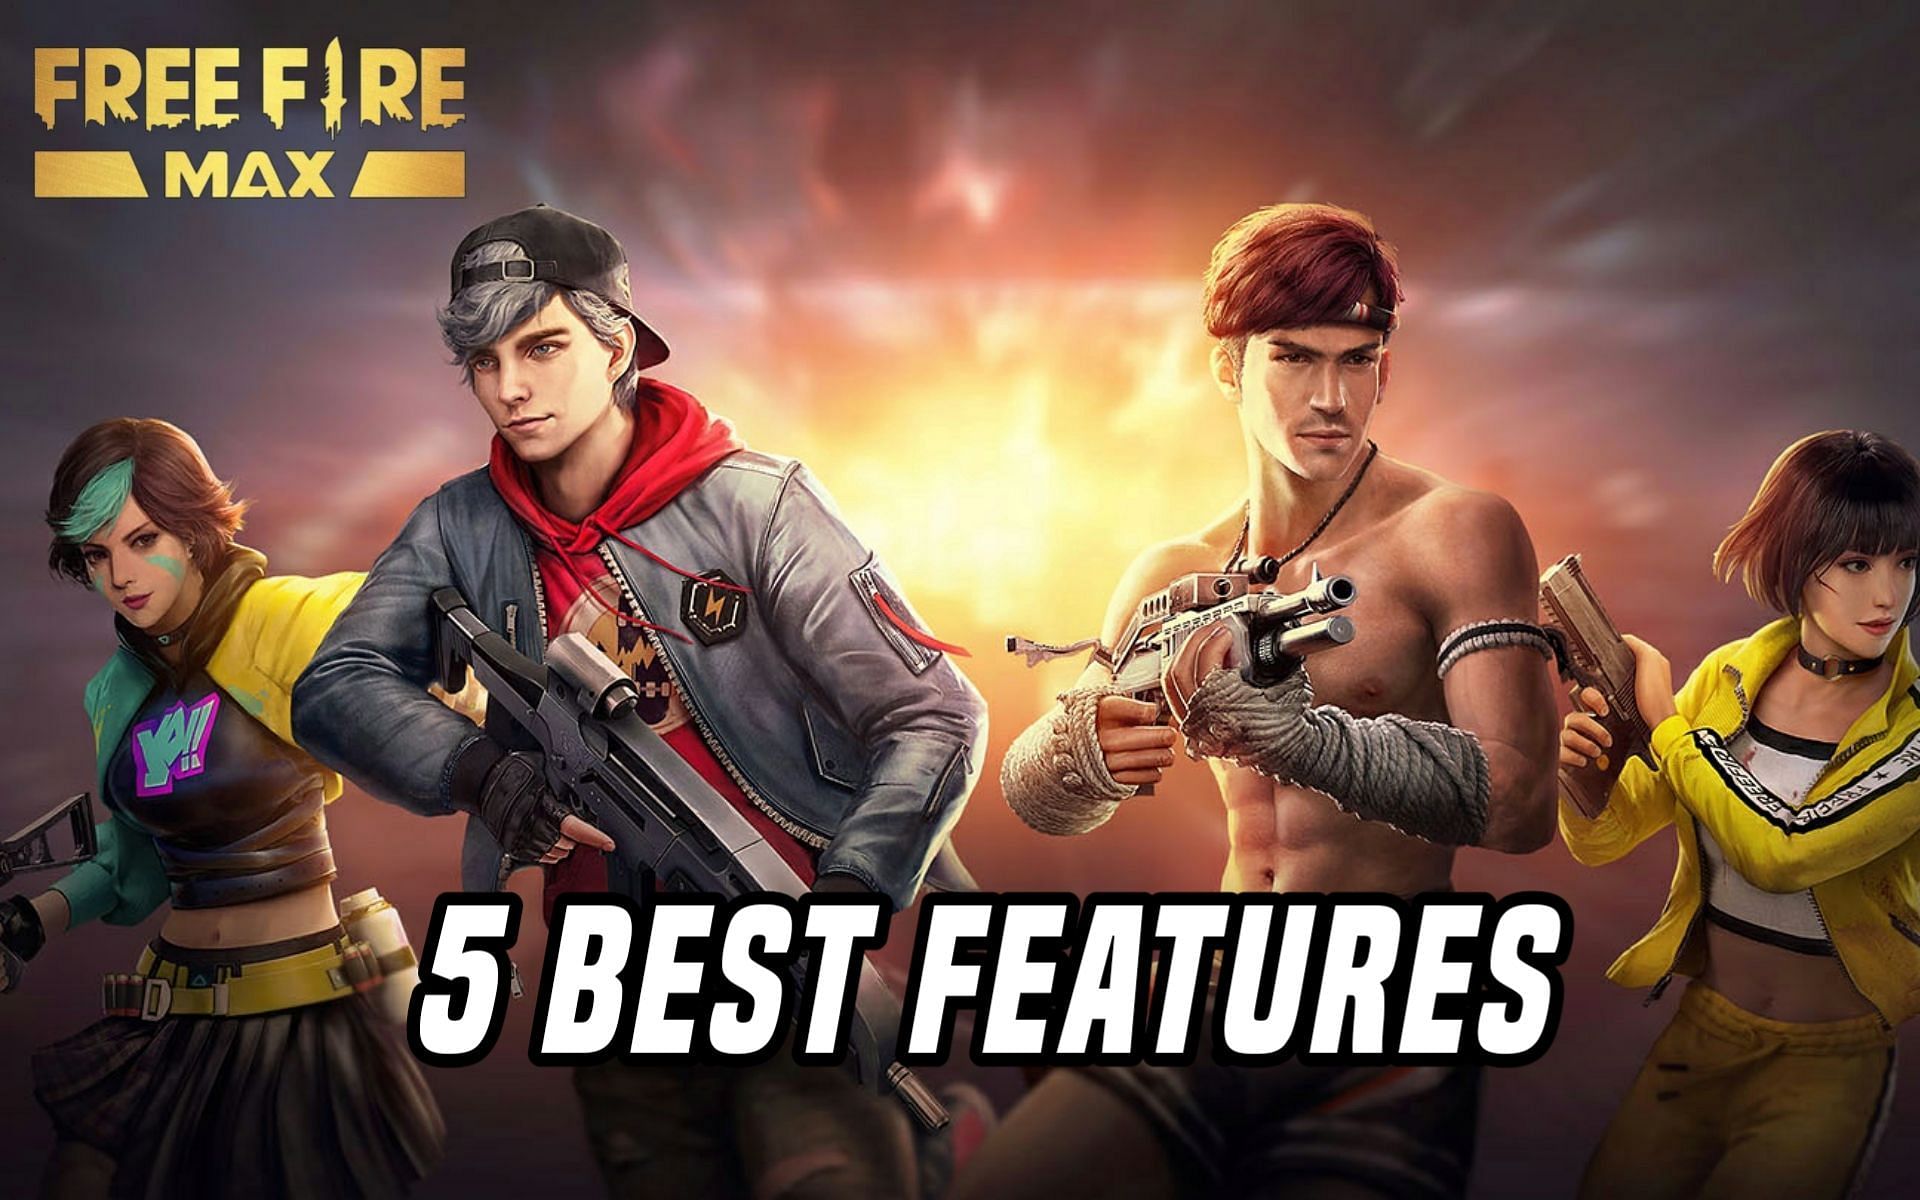 Details about the best features of the Free Fire MAX OB35 update (Image via Sportskeeda)